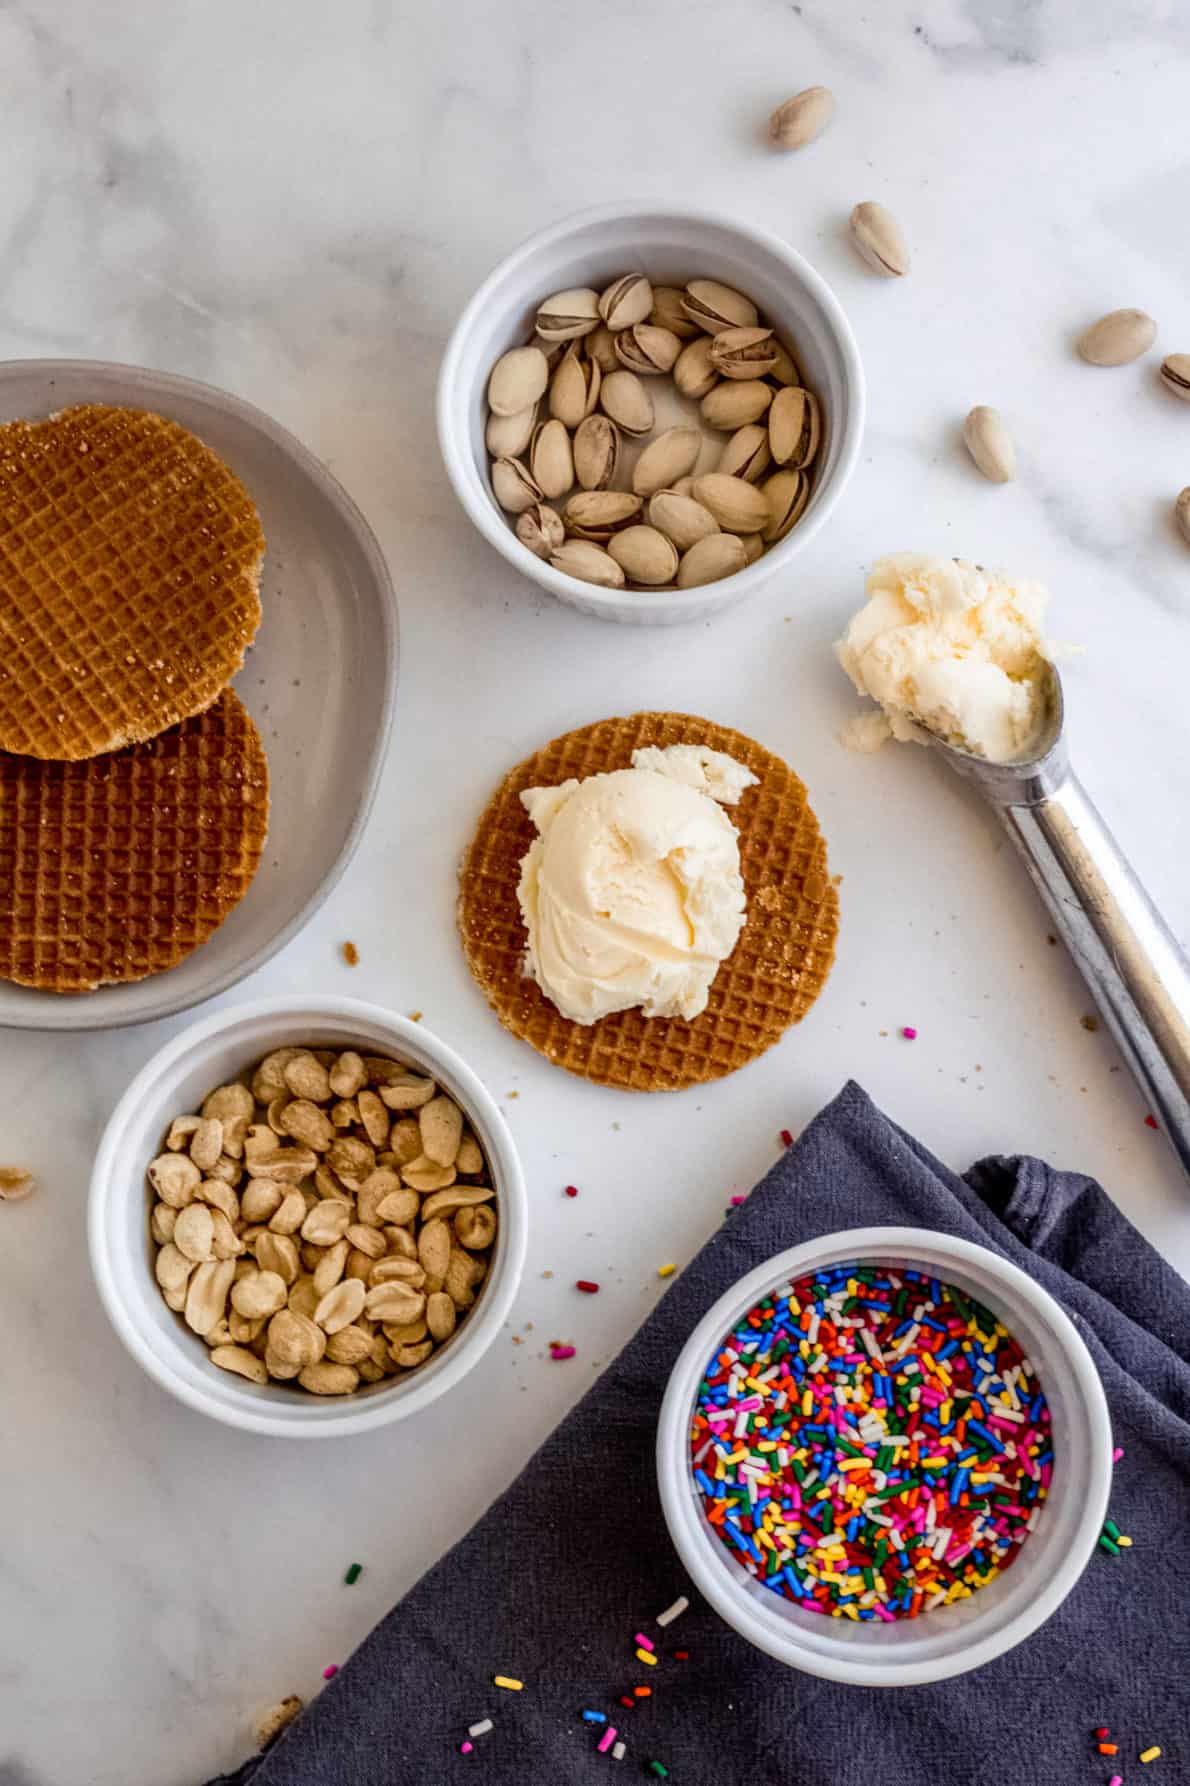 Stroopwafel ice cream sandwiches ingredients laid out on a marble surface.